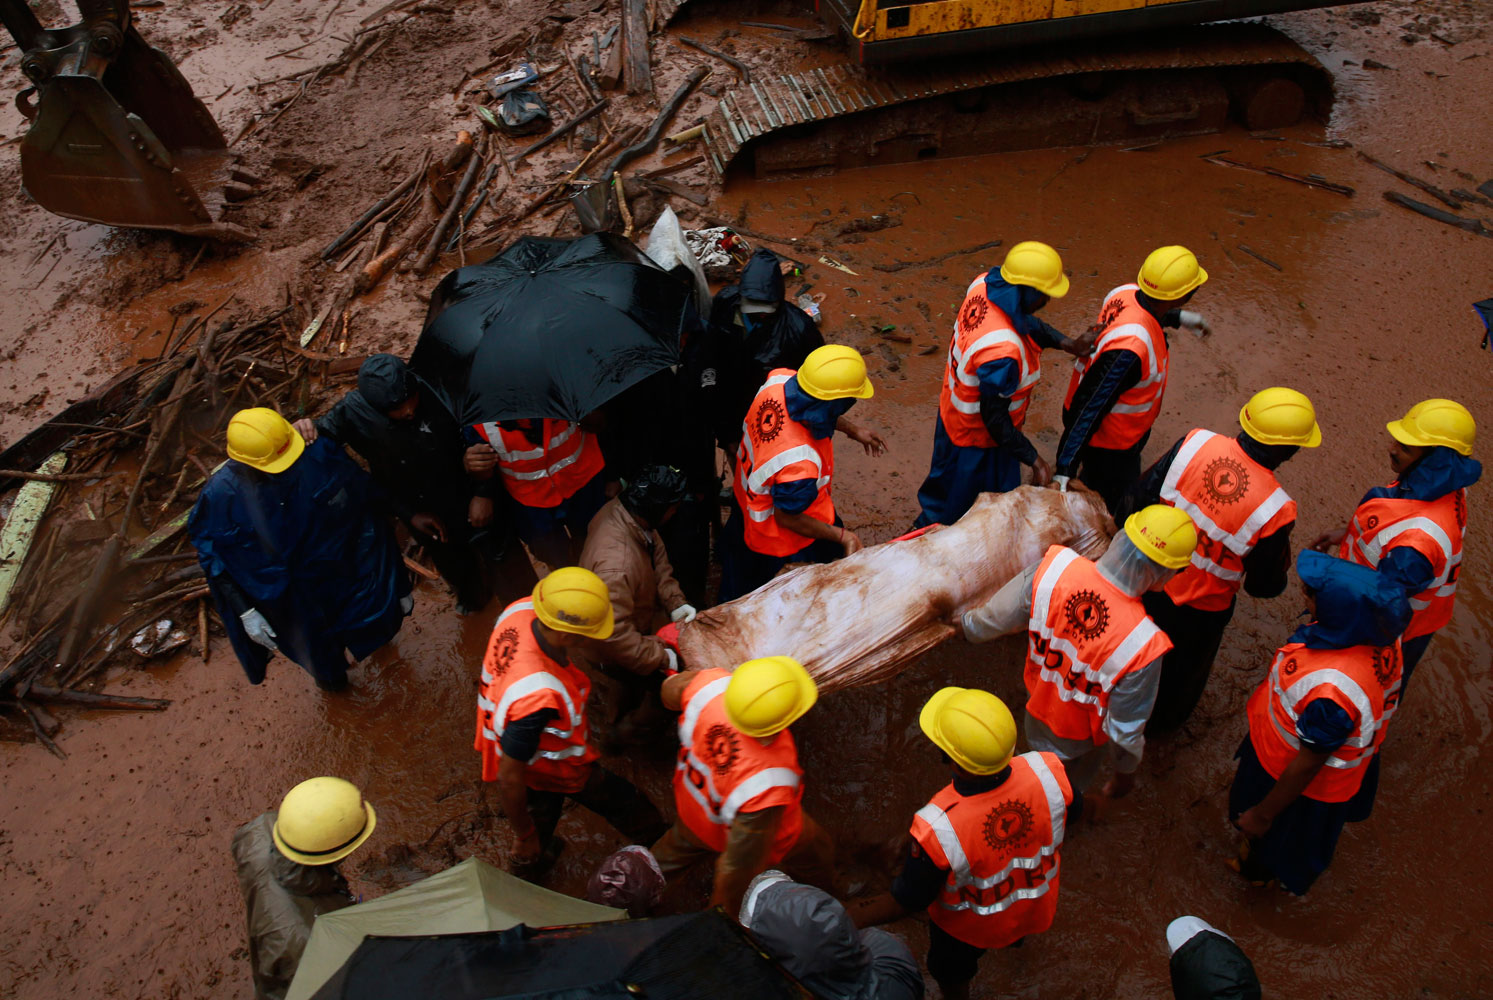 Rescue workers carry the body of a victim after a massive landslide in Malin village in Pune district of western Maharashtra state, India on July 31, 2014. Two days of torrential rains triggered the landslide early Wednesday, killing more than two dozen people and trapping more than 150, authorities said.